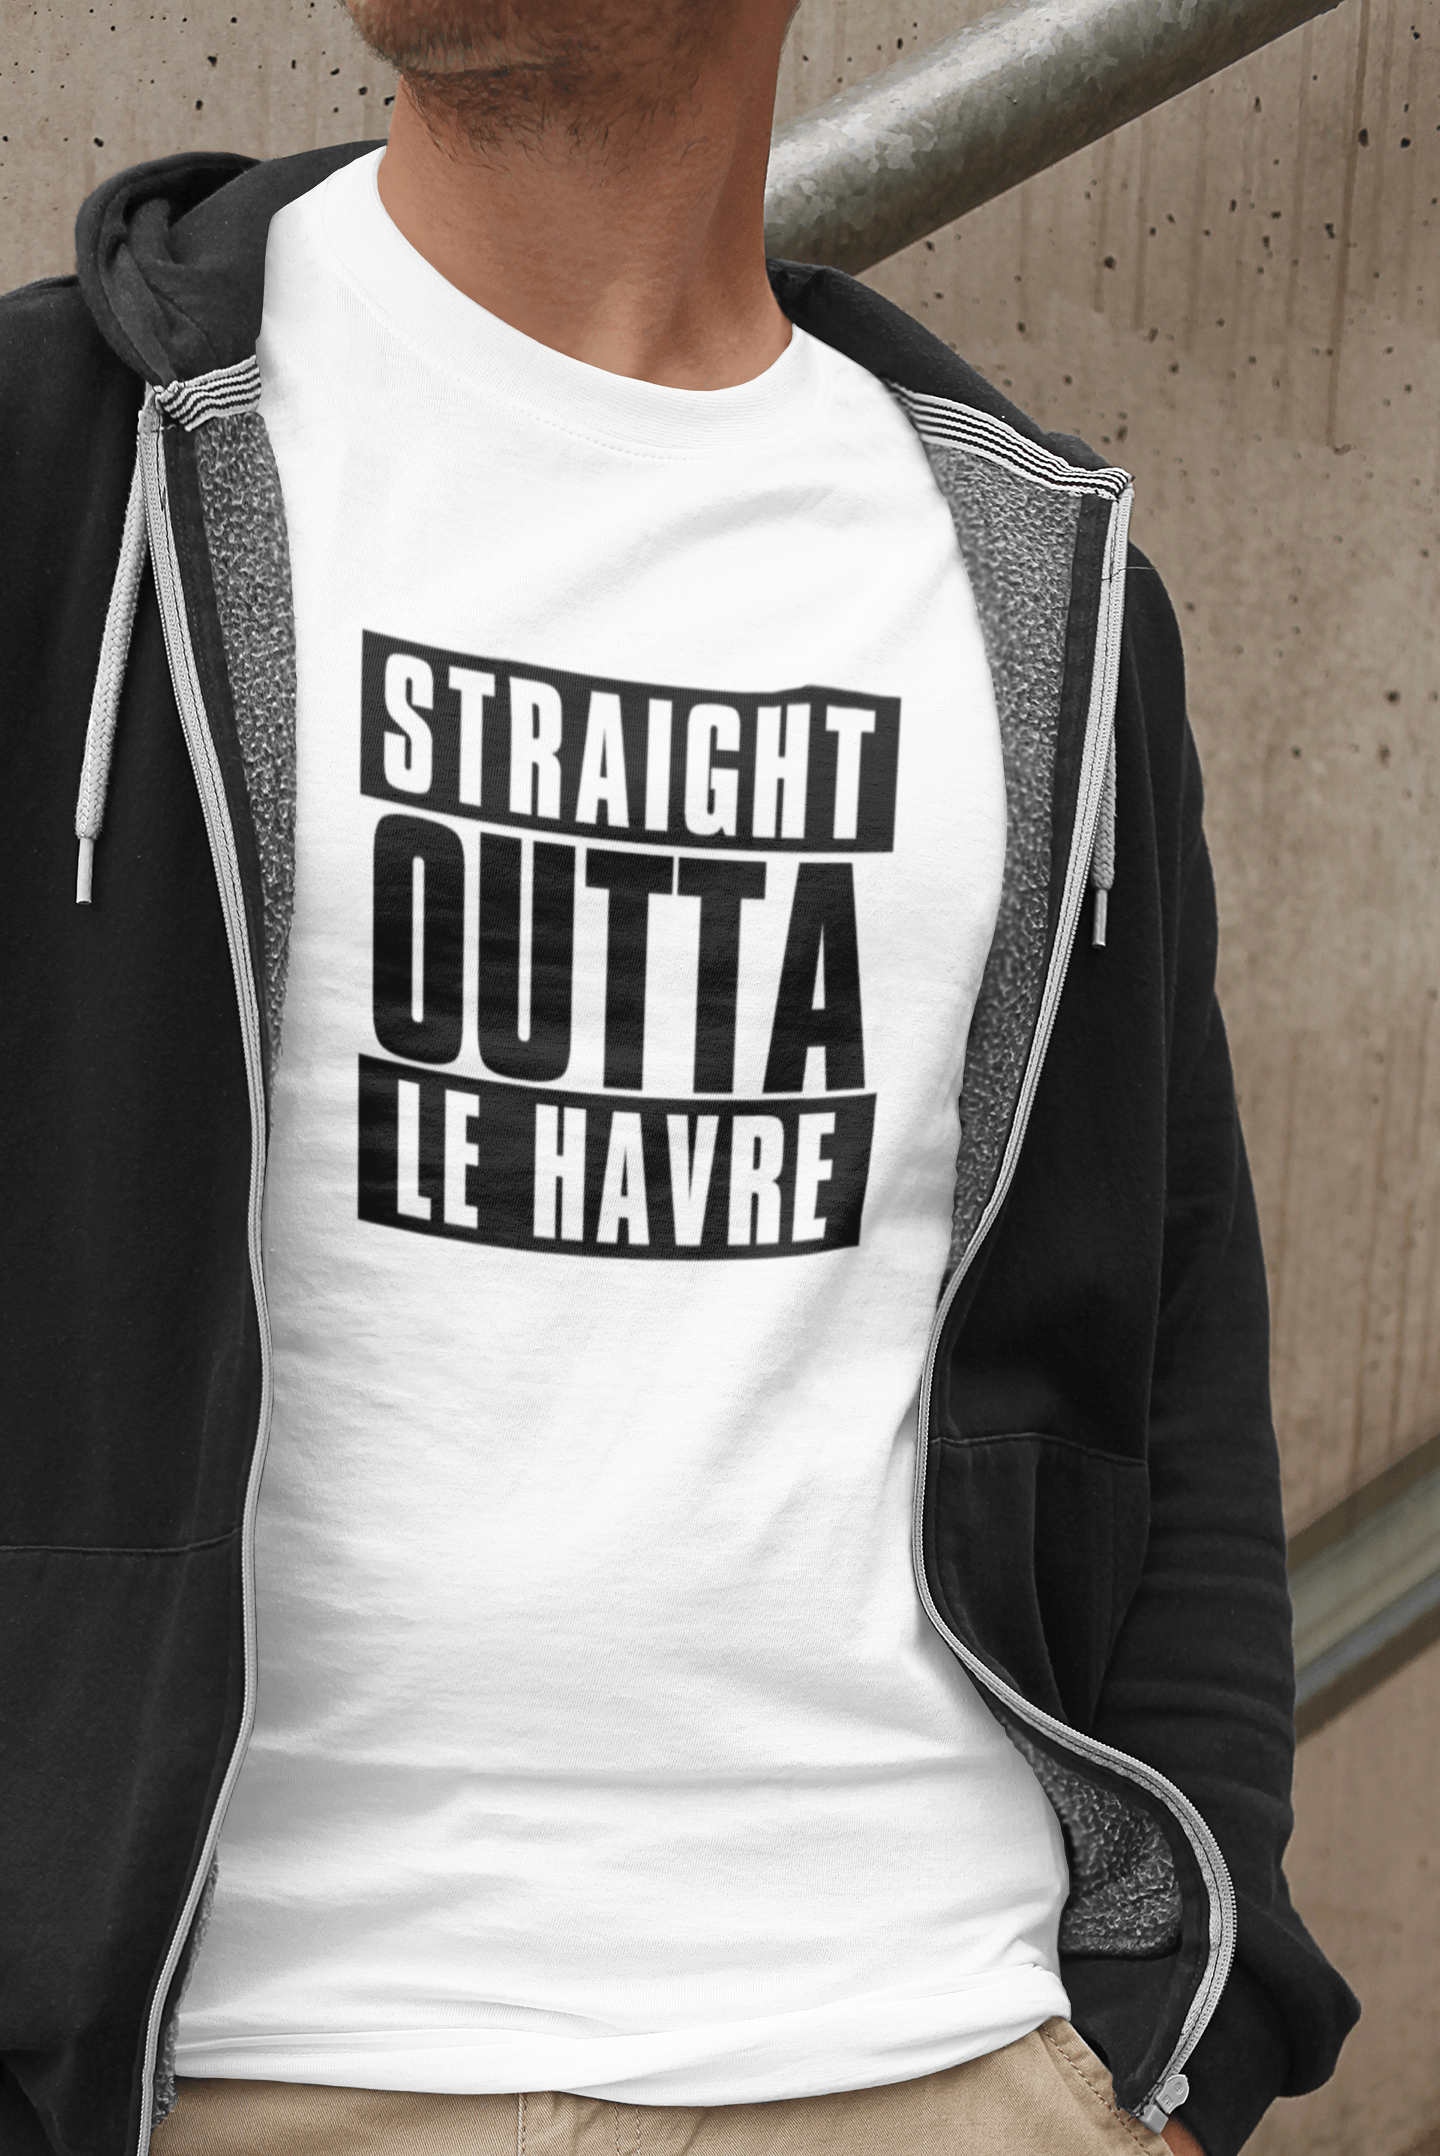 Straight Outta Le havre, Men's Short Sleeve Round Neck T-shirt 00027